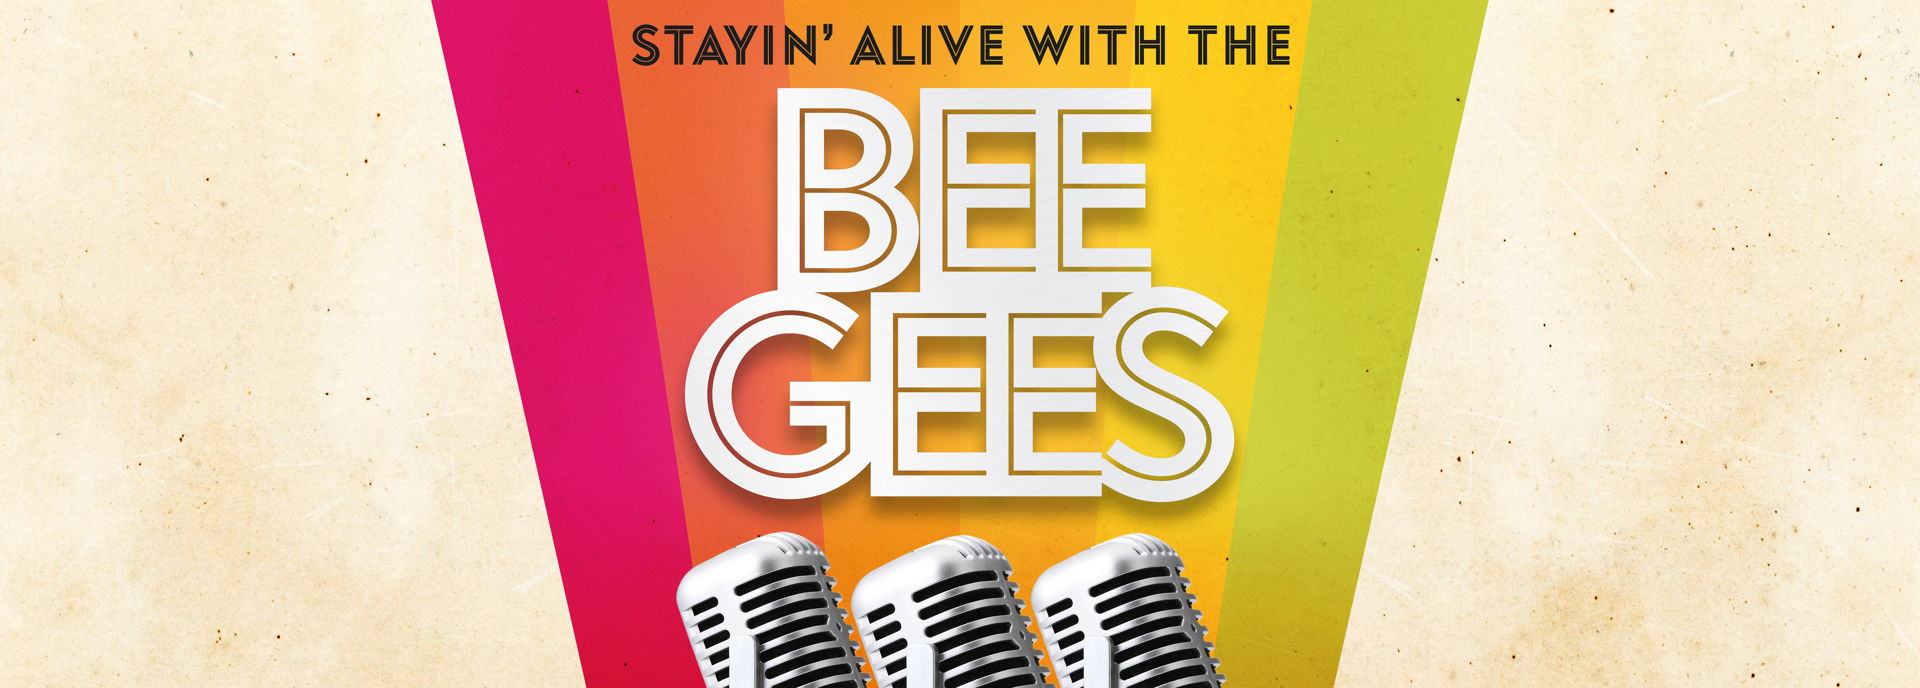 Legendary Albums Live - Stayin' Alive With The Bee Gees - 2022 - in De Tamboer